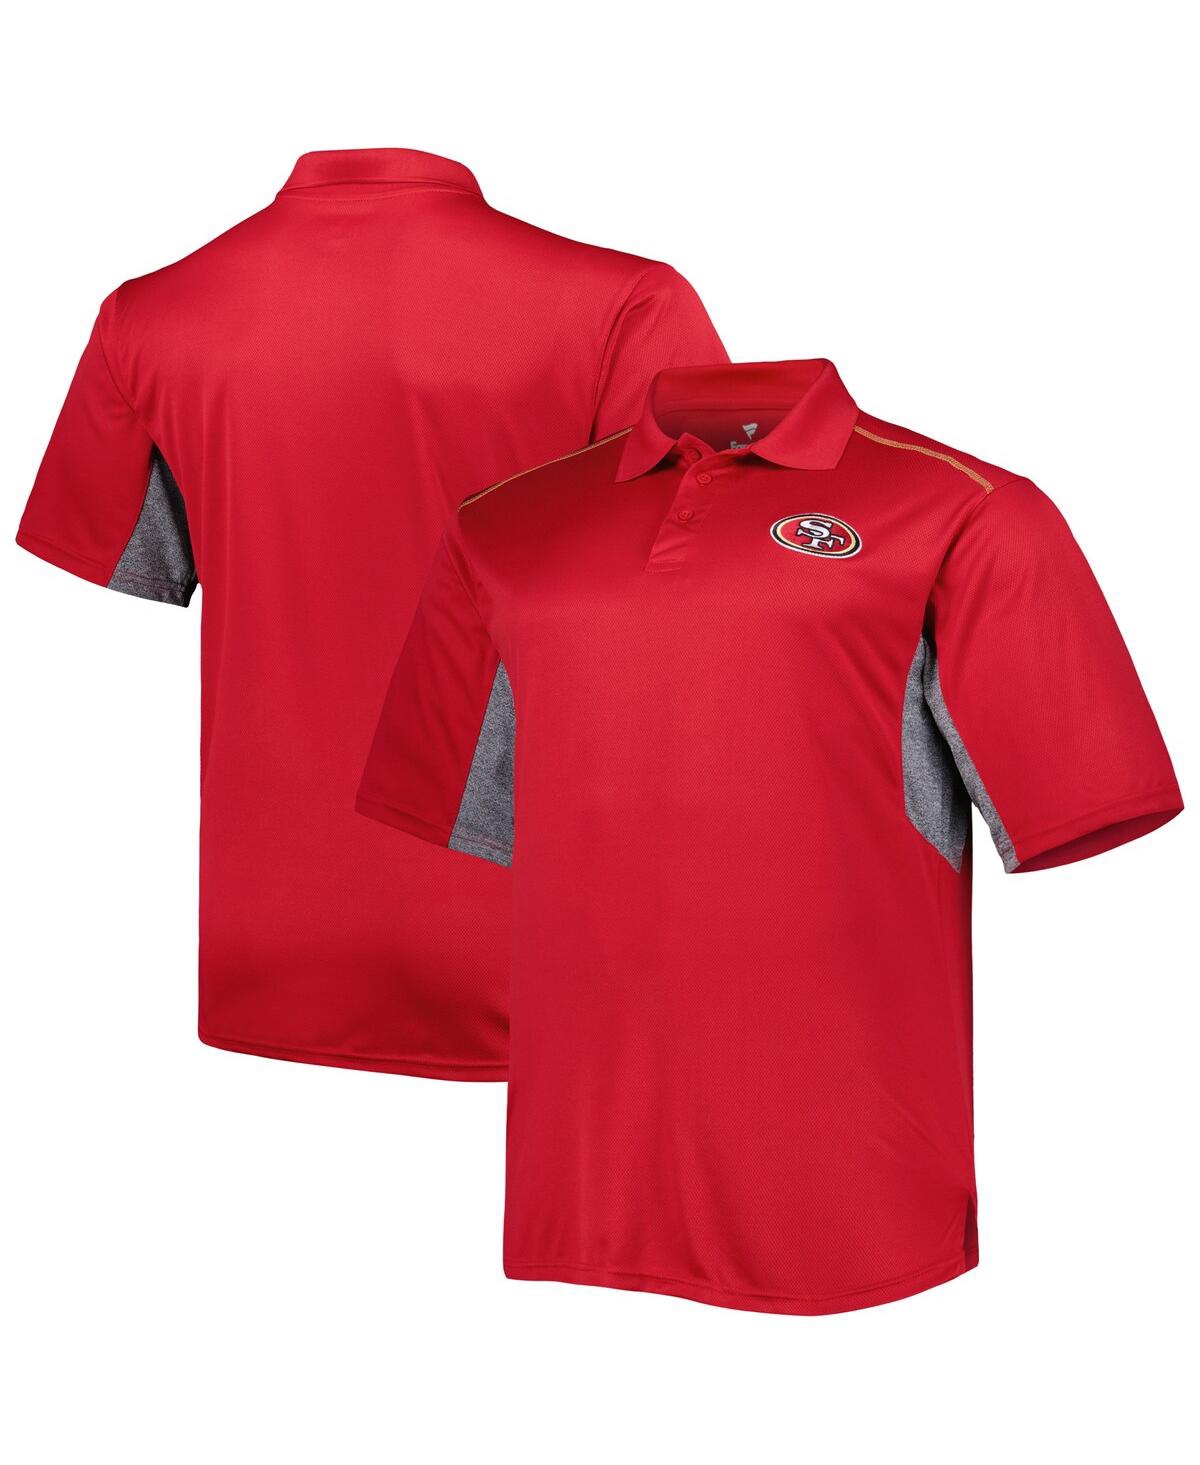 Men's Scarlet San Francisco 49ers Big and Tall Team Color Polo Shirt - Scarlet